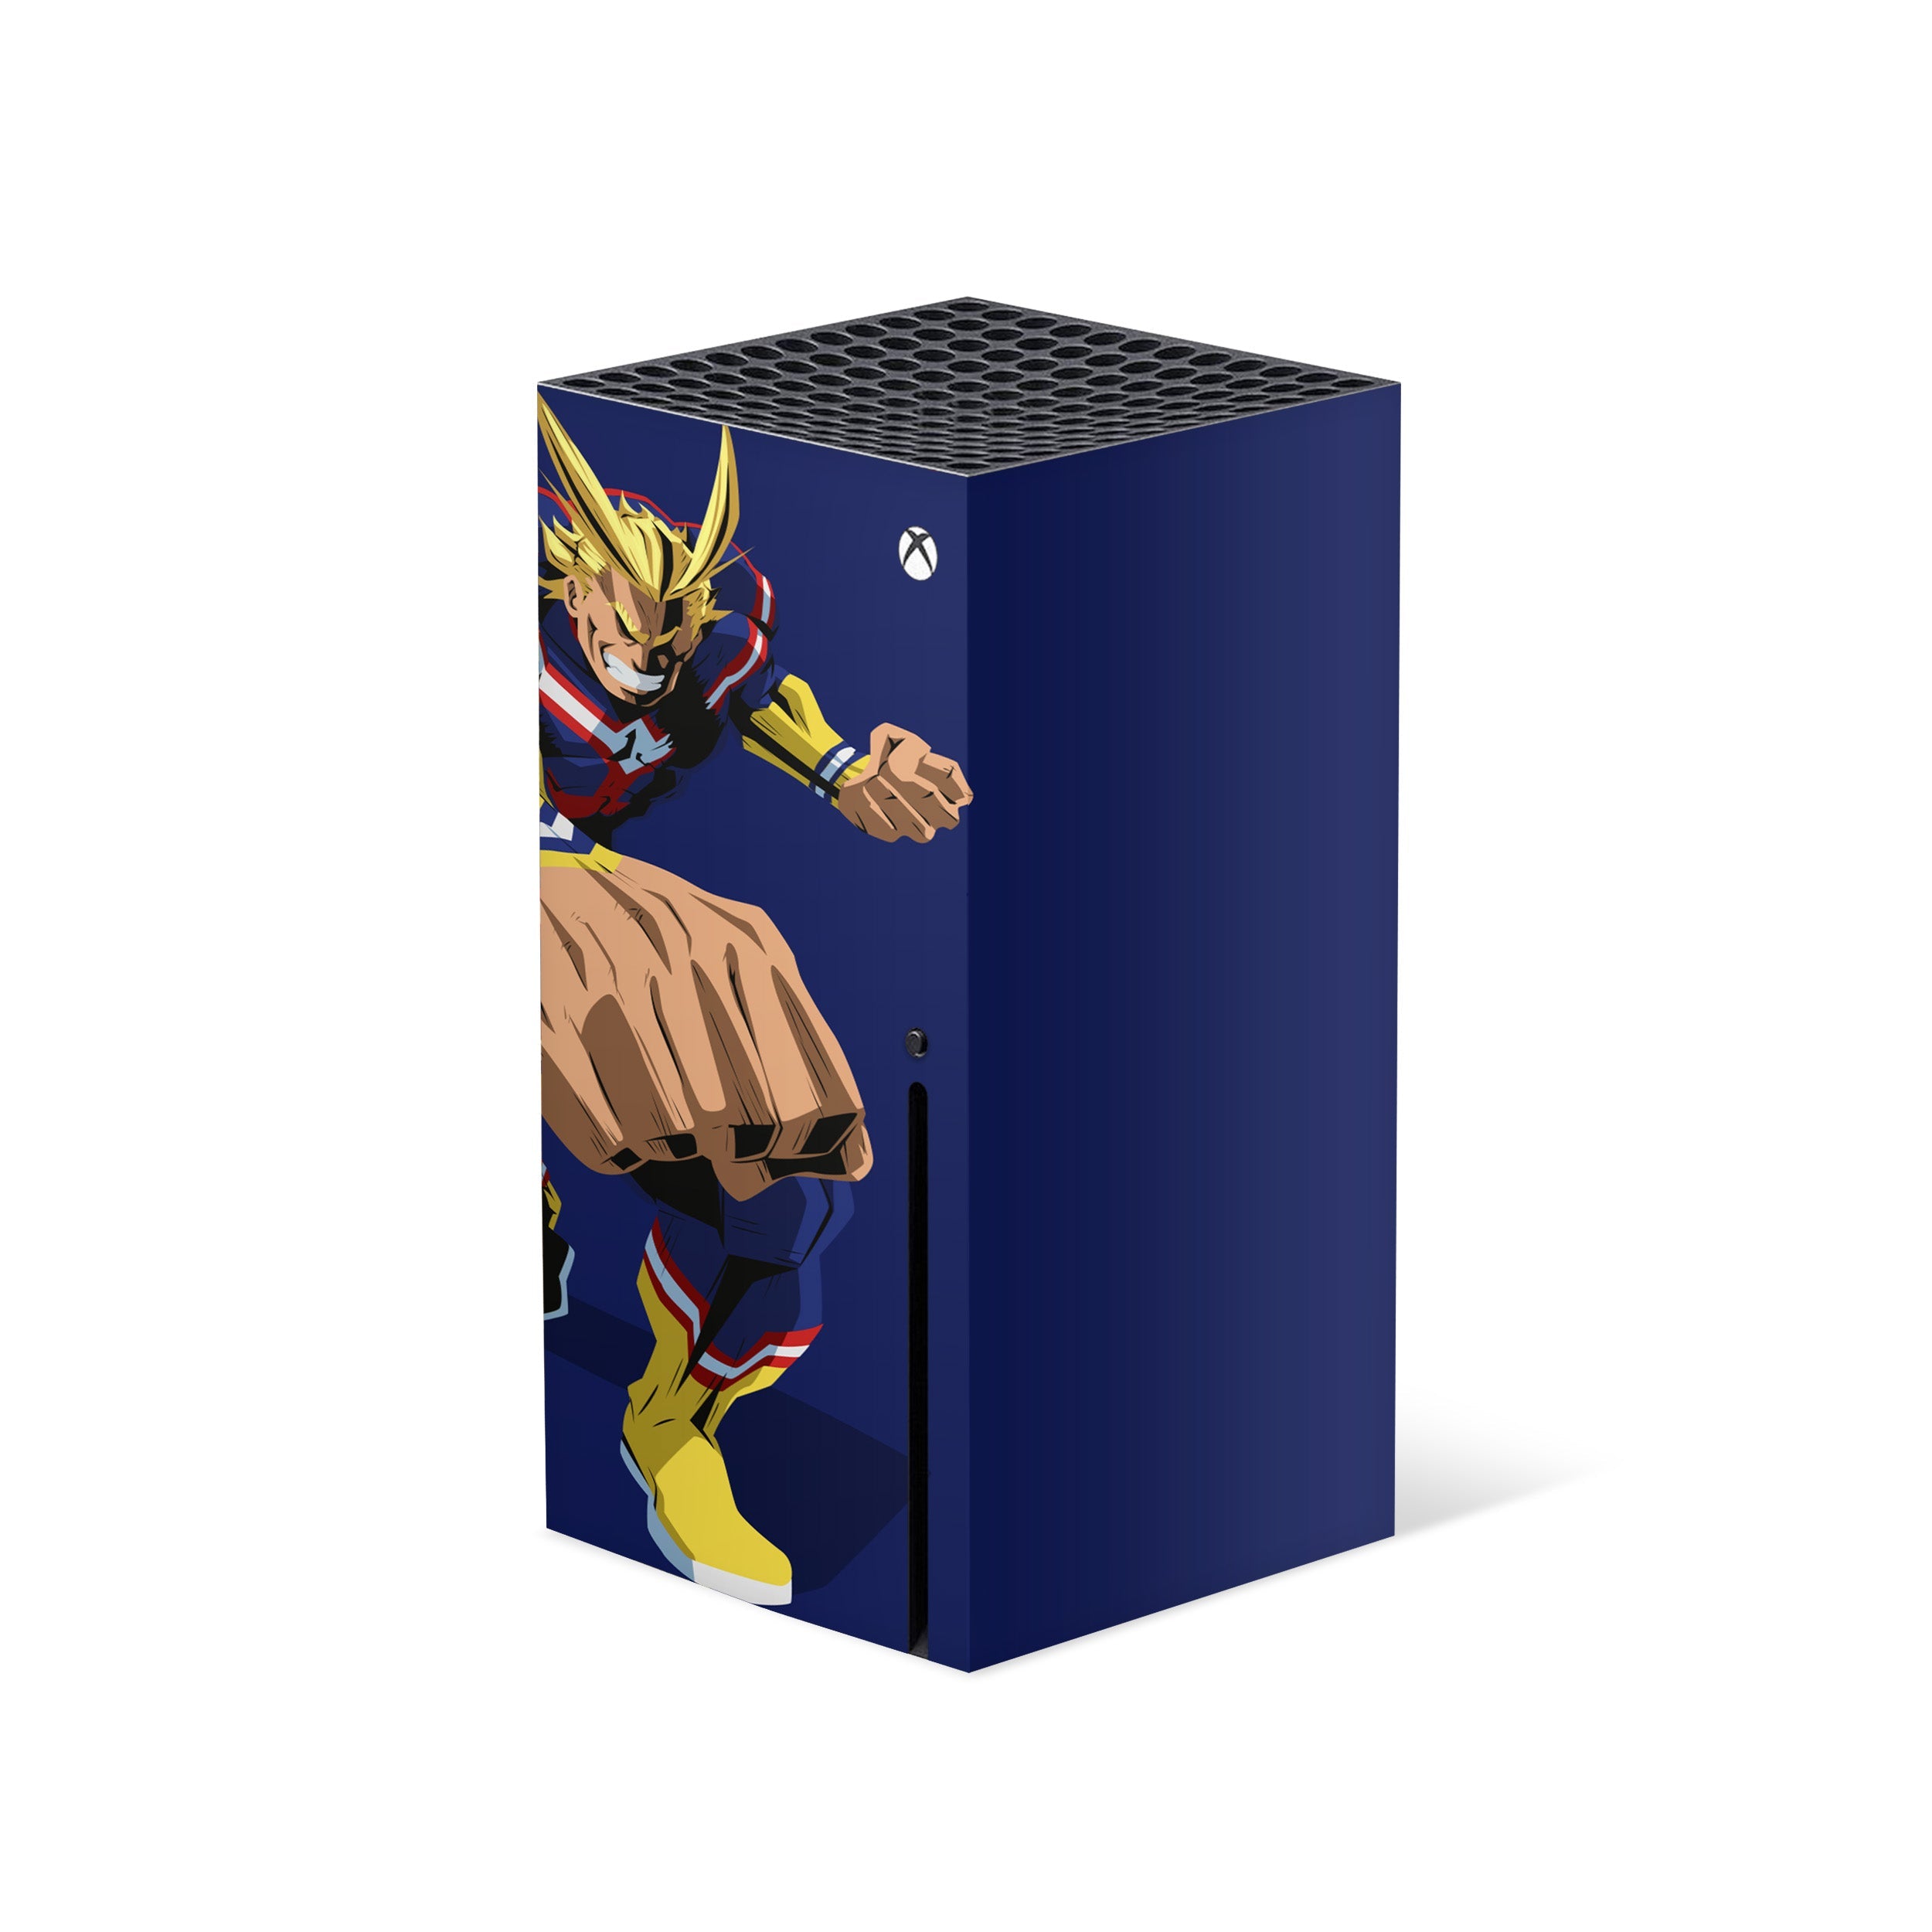 A video game skin featuring a My Hero Academia All Might design for the Xbox Series X.